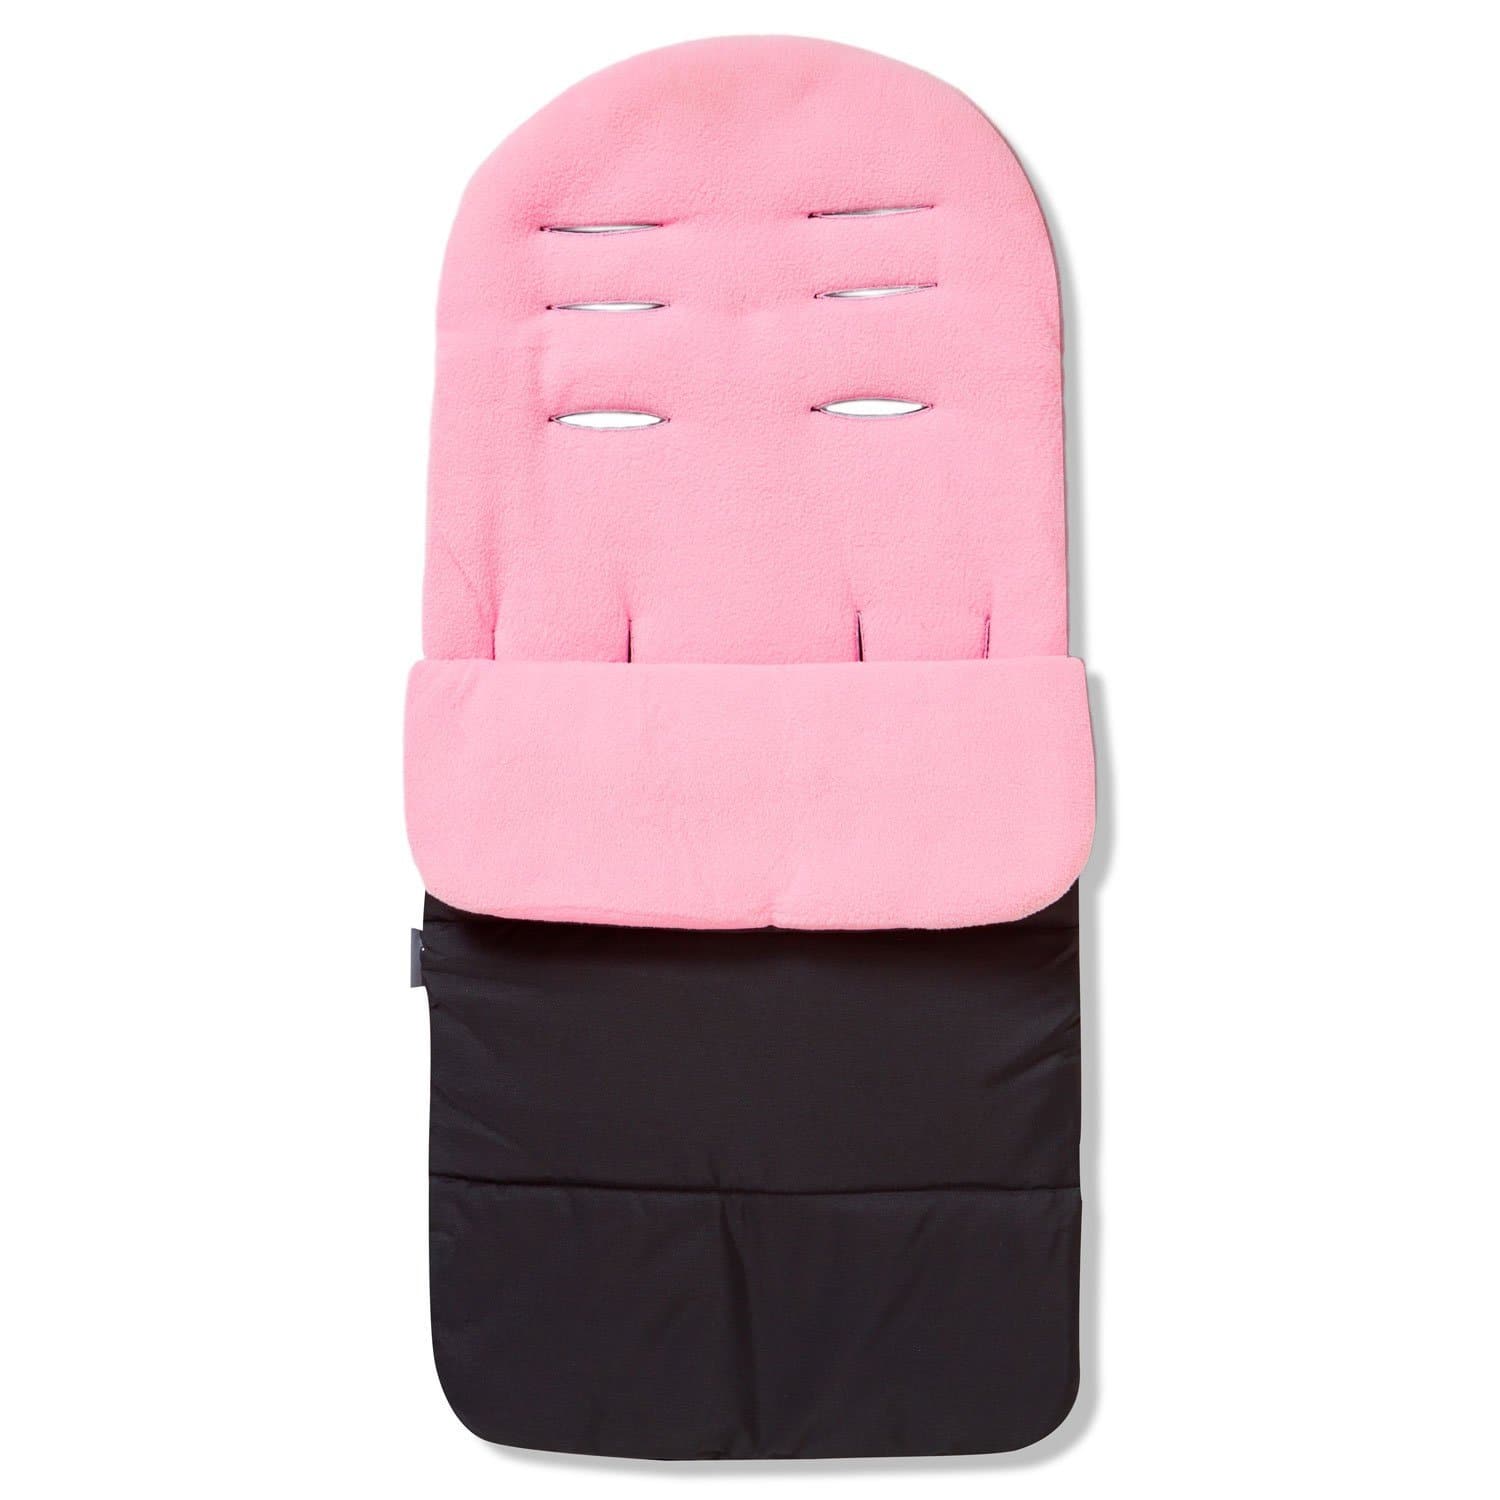 Premium Footmuff / Cosy Toes Compatible with Venicci - For Your Little One